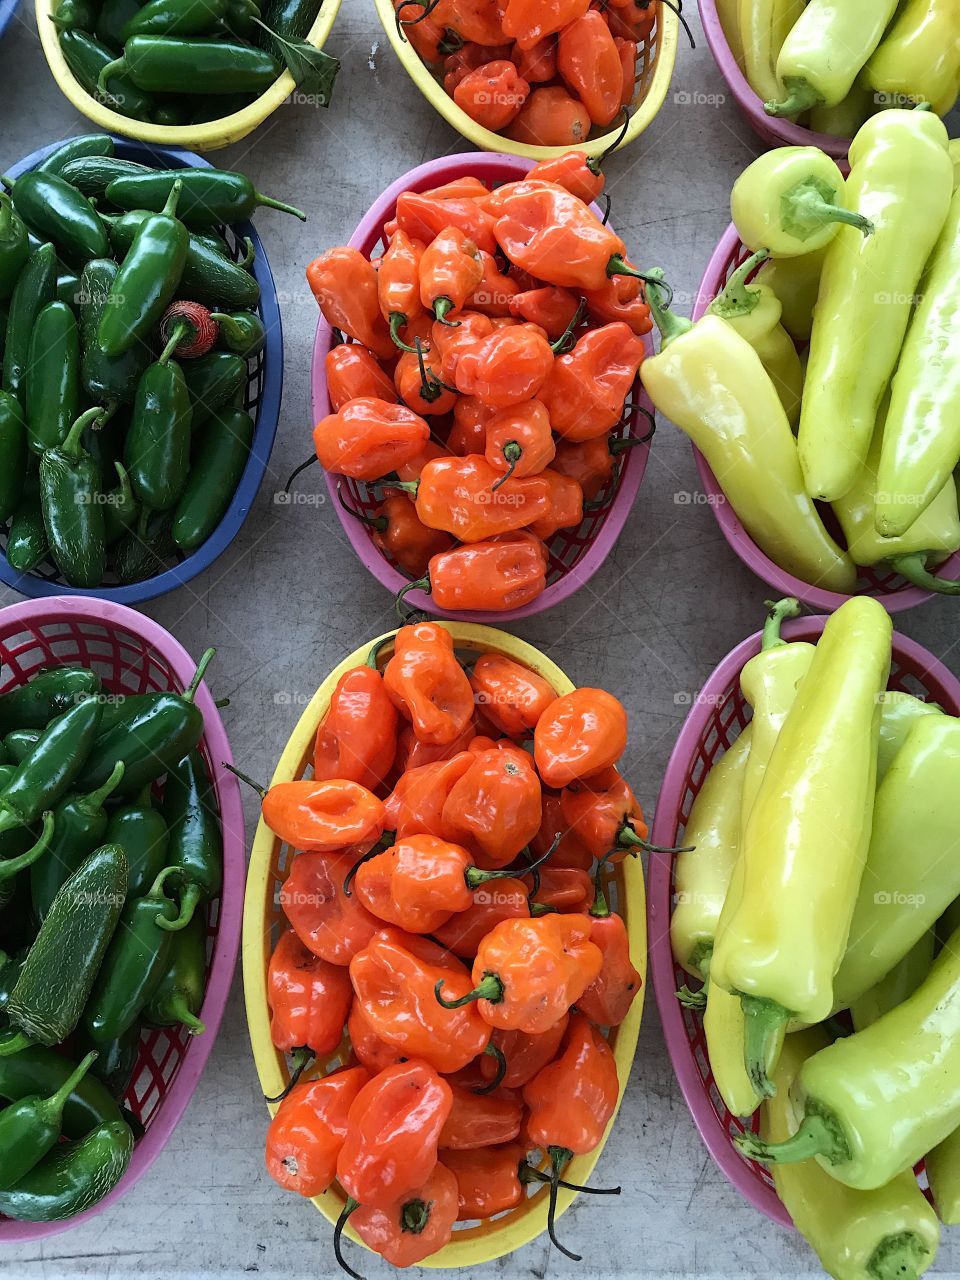 Green, orange, and yellow peppers. 